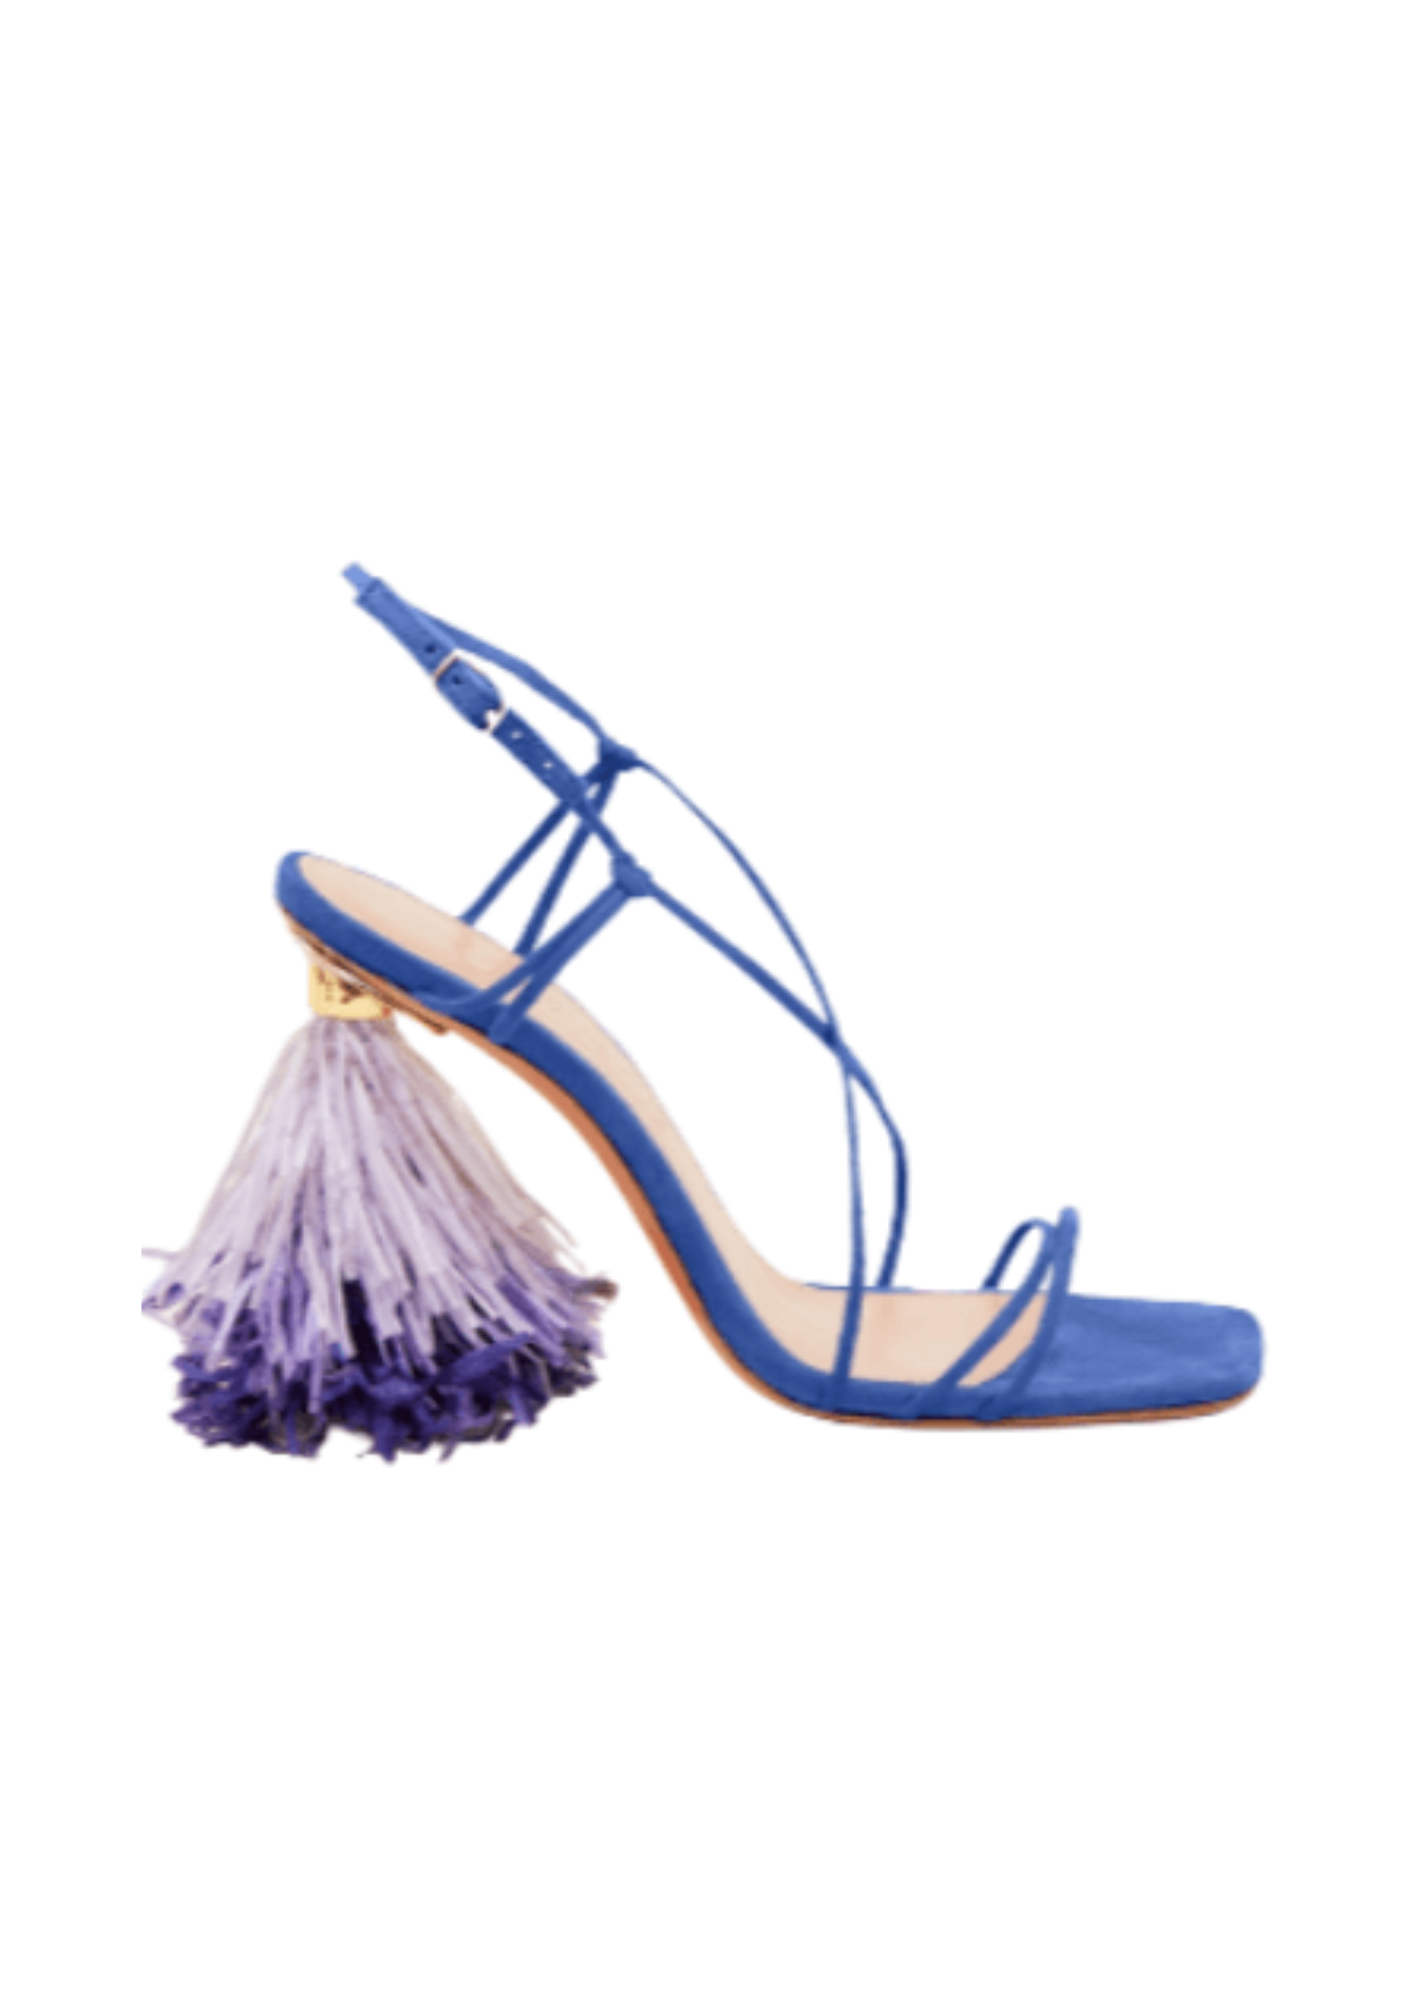 BLUE HIGH-HEELED SANDALS WITH POMPOM